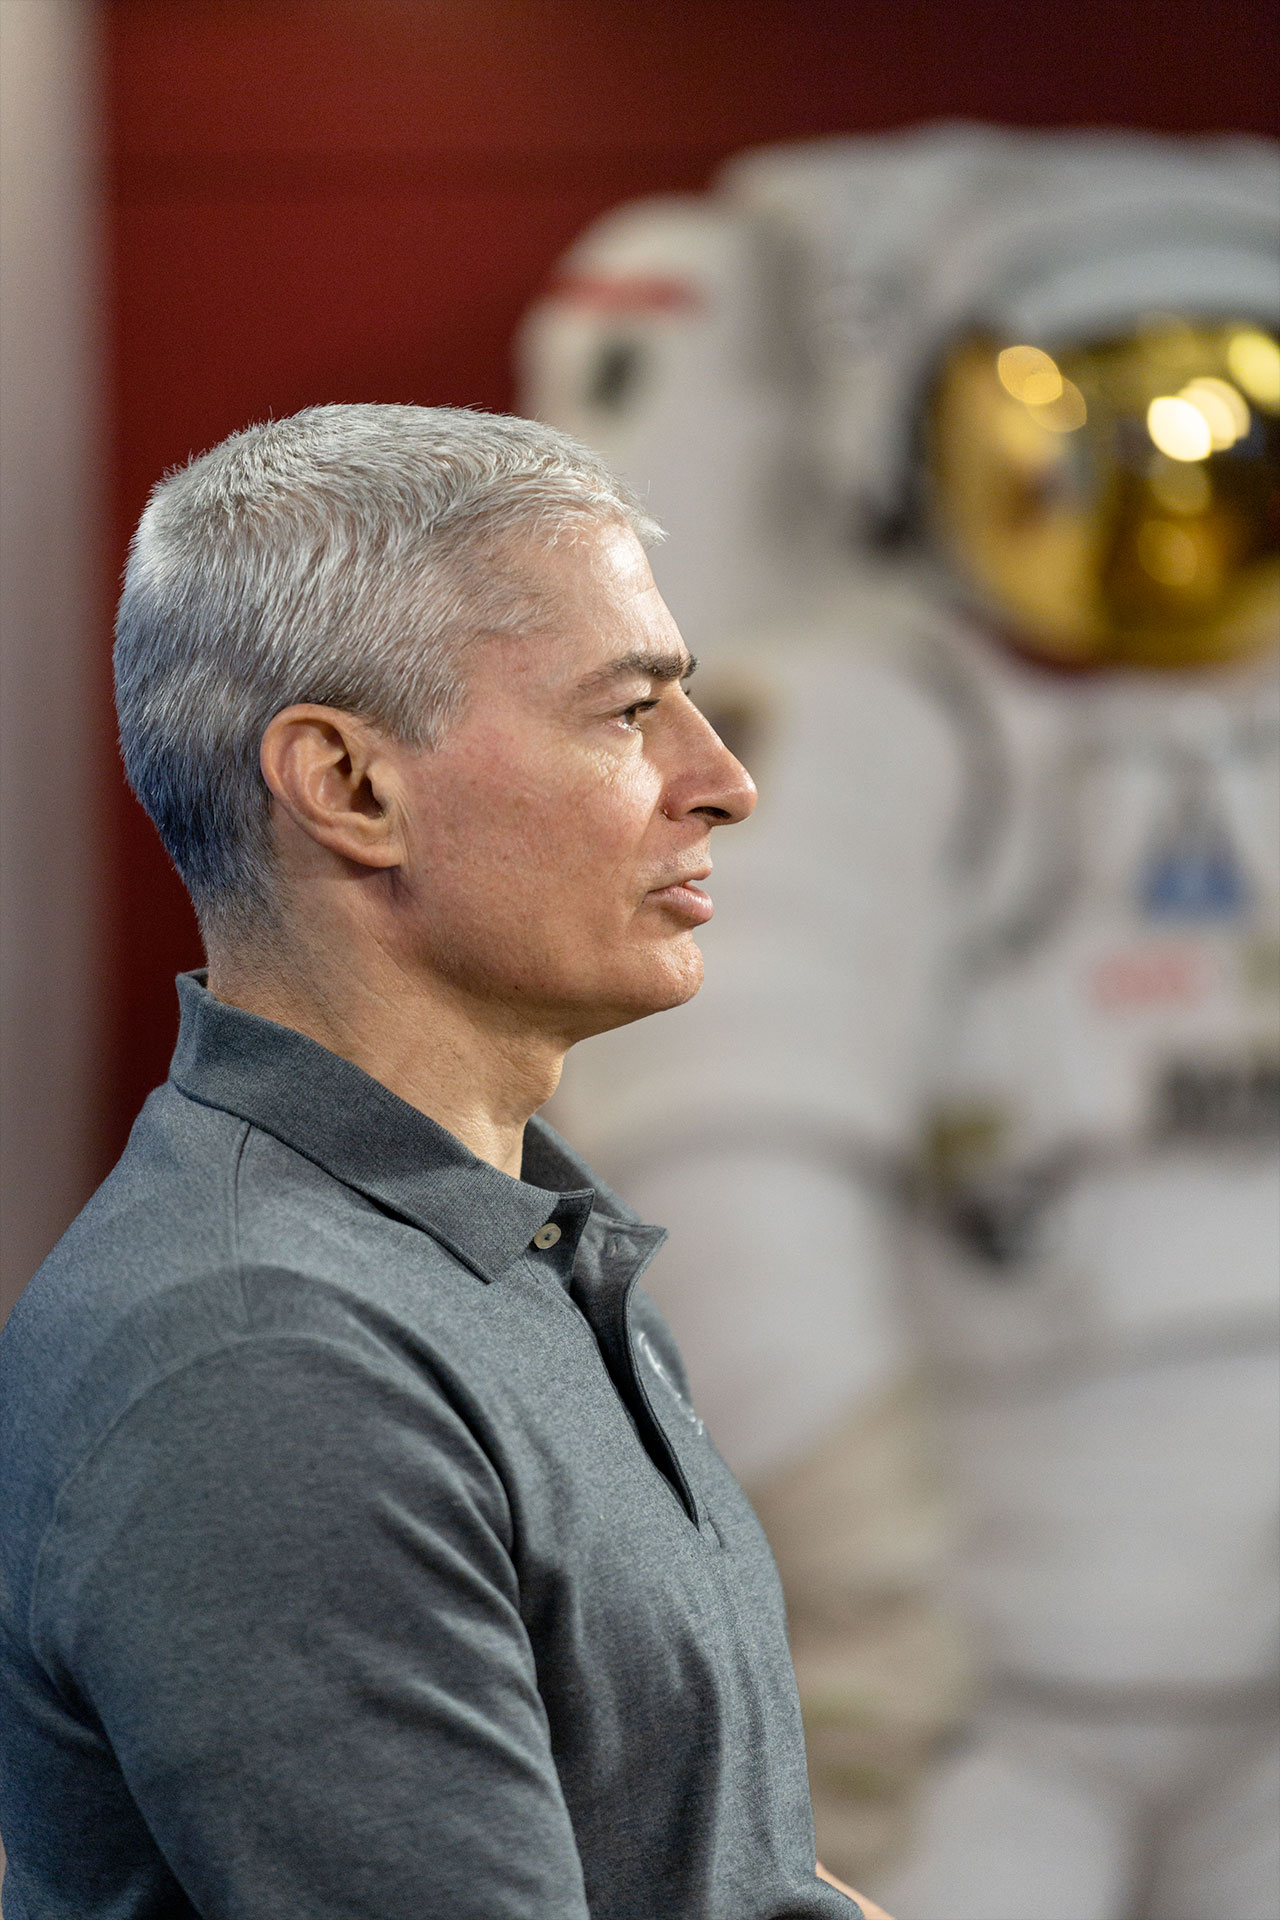 NASA astronaut Mark Vande Hei now sees the feasibility for longer duration, deep space missions after spending 355 days aboard the International Space Station.